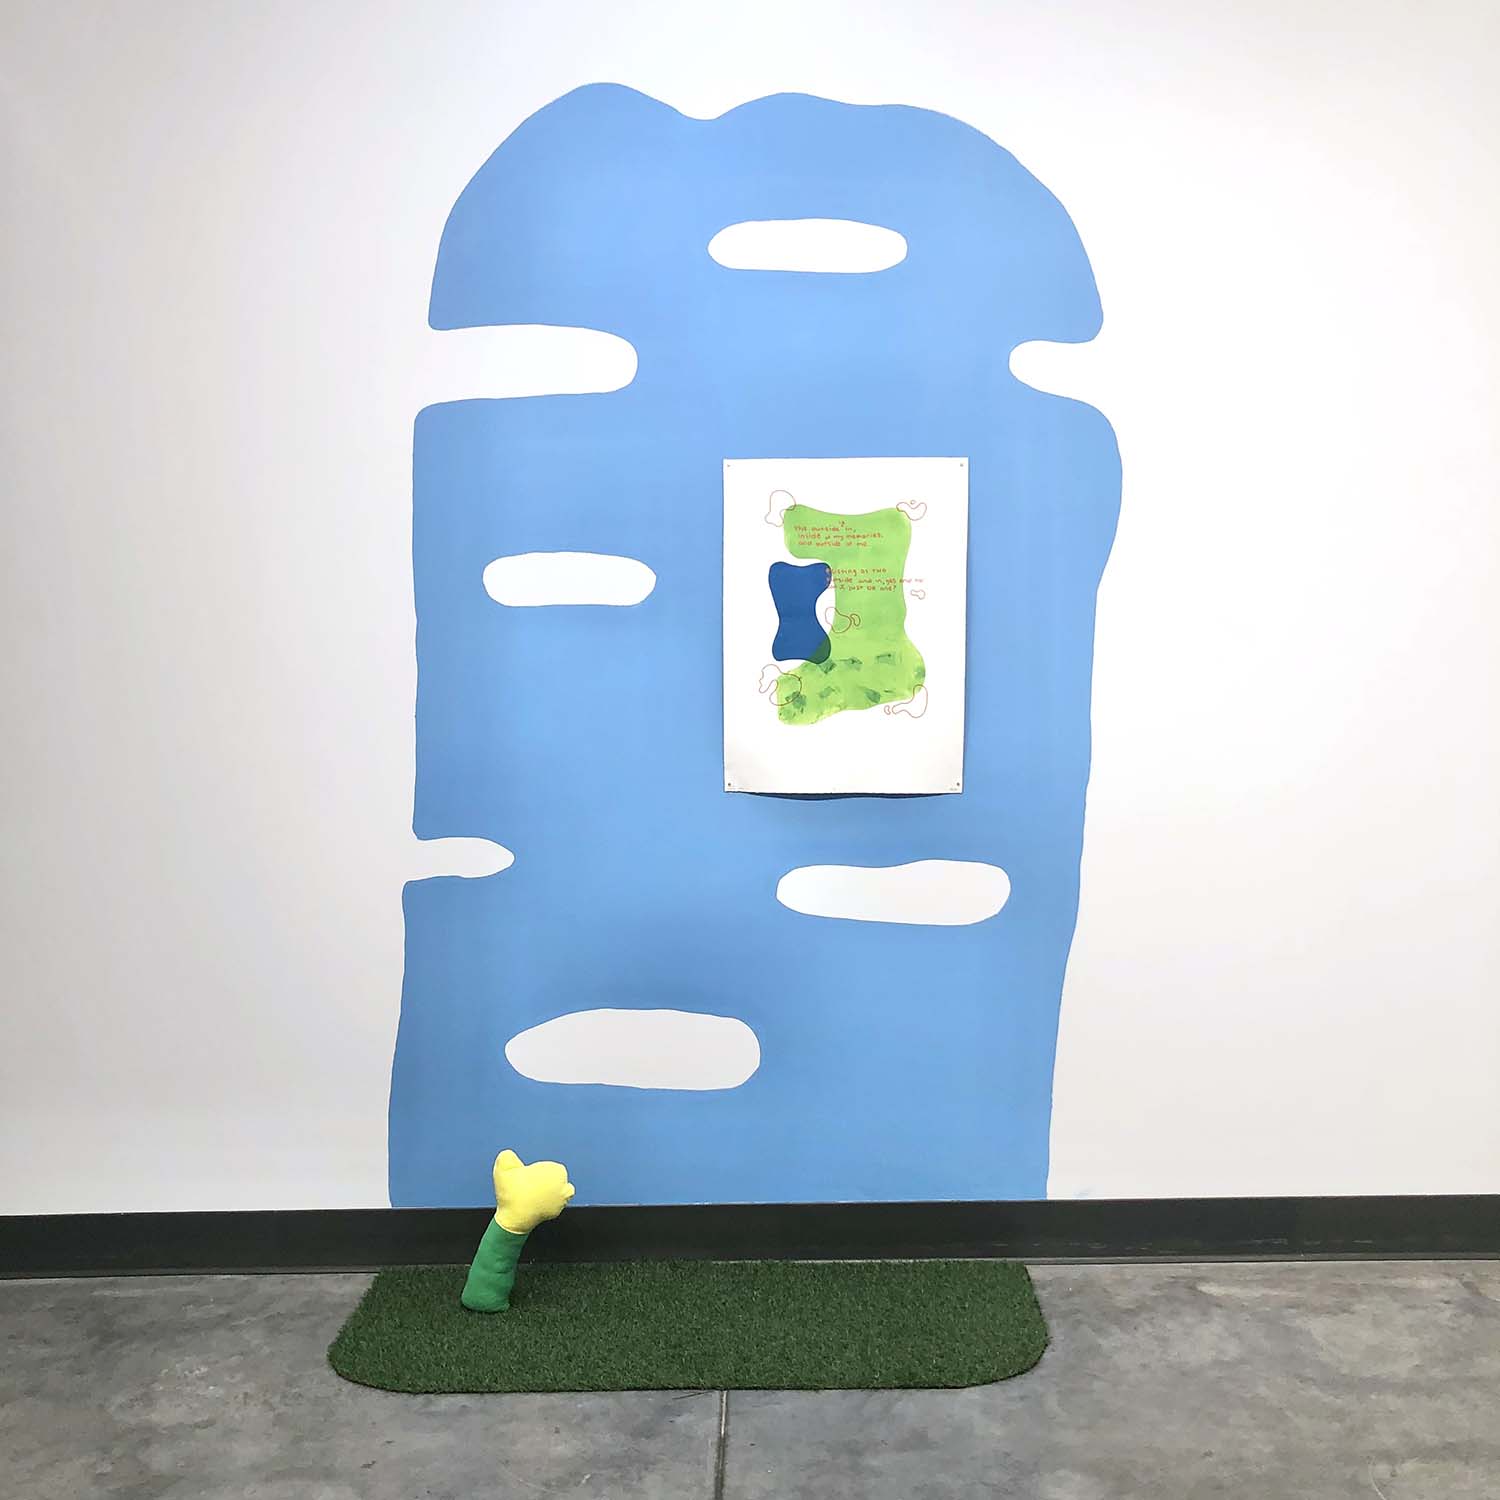 installation with blue painted wall, print and fake grass